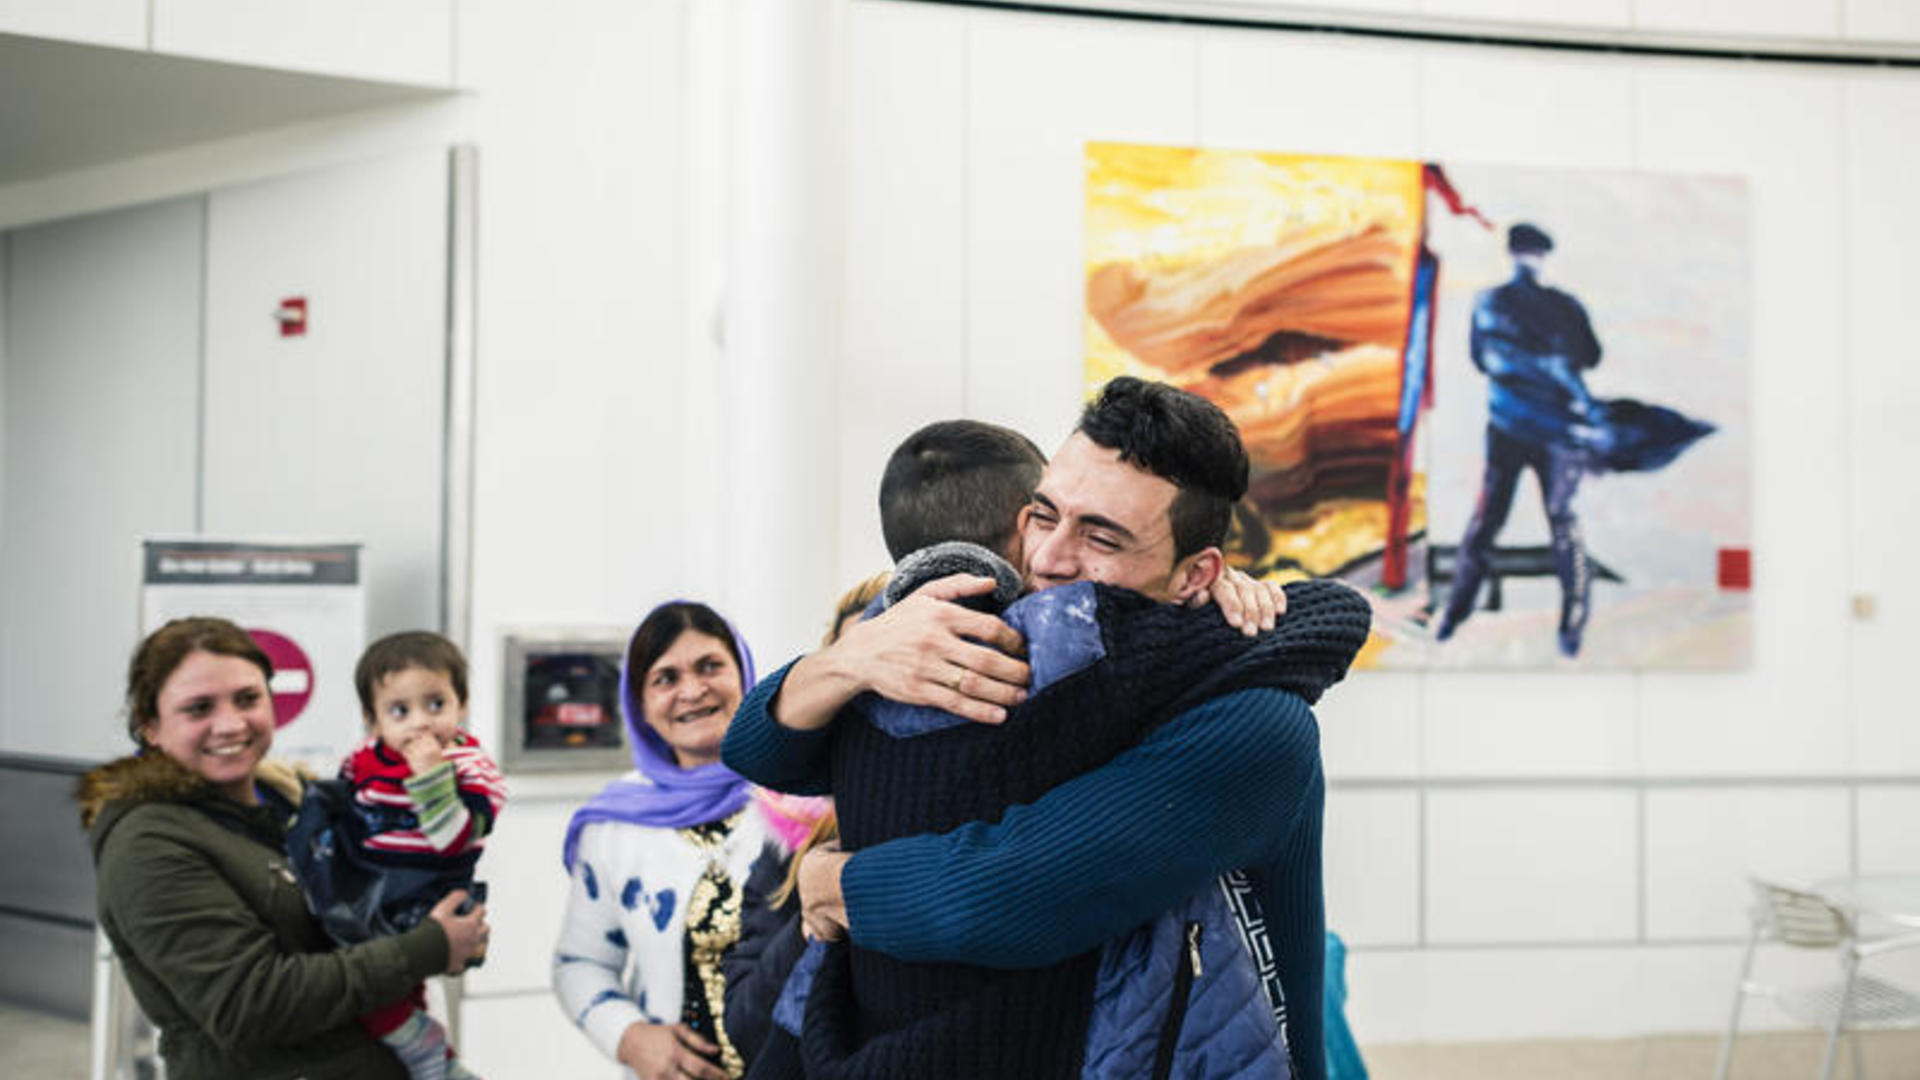 An Iraqi refugee hugs one of his relatives on arrival at a U.S. airport after being vetted for resettlement